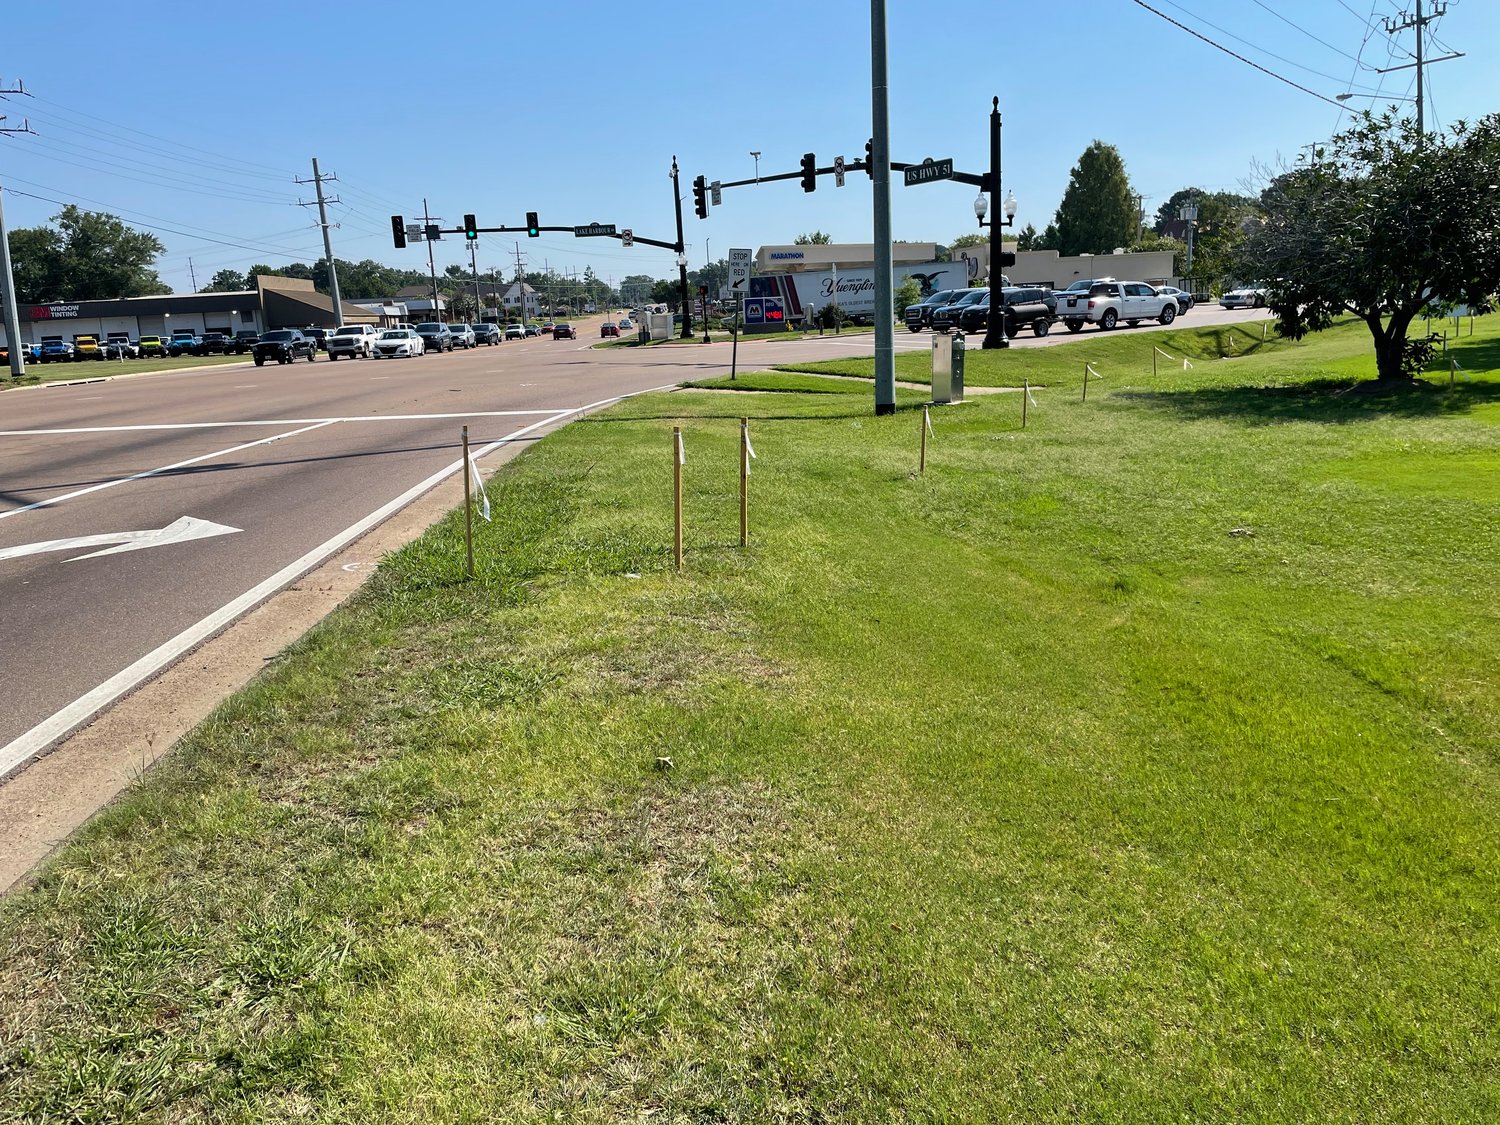 The city is preparing to expand the turn lanes onto U.S. 51 southbound from Lake Harbour Drive.